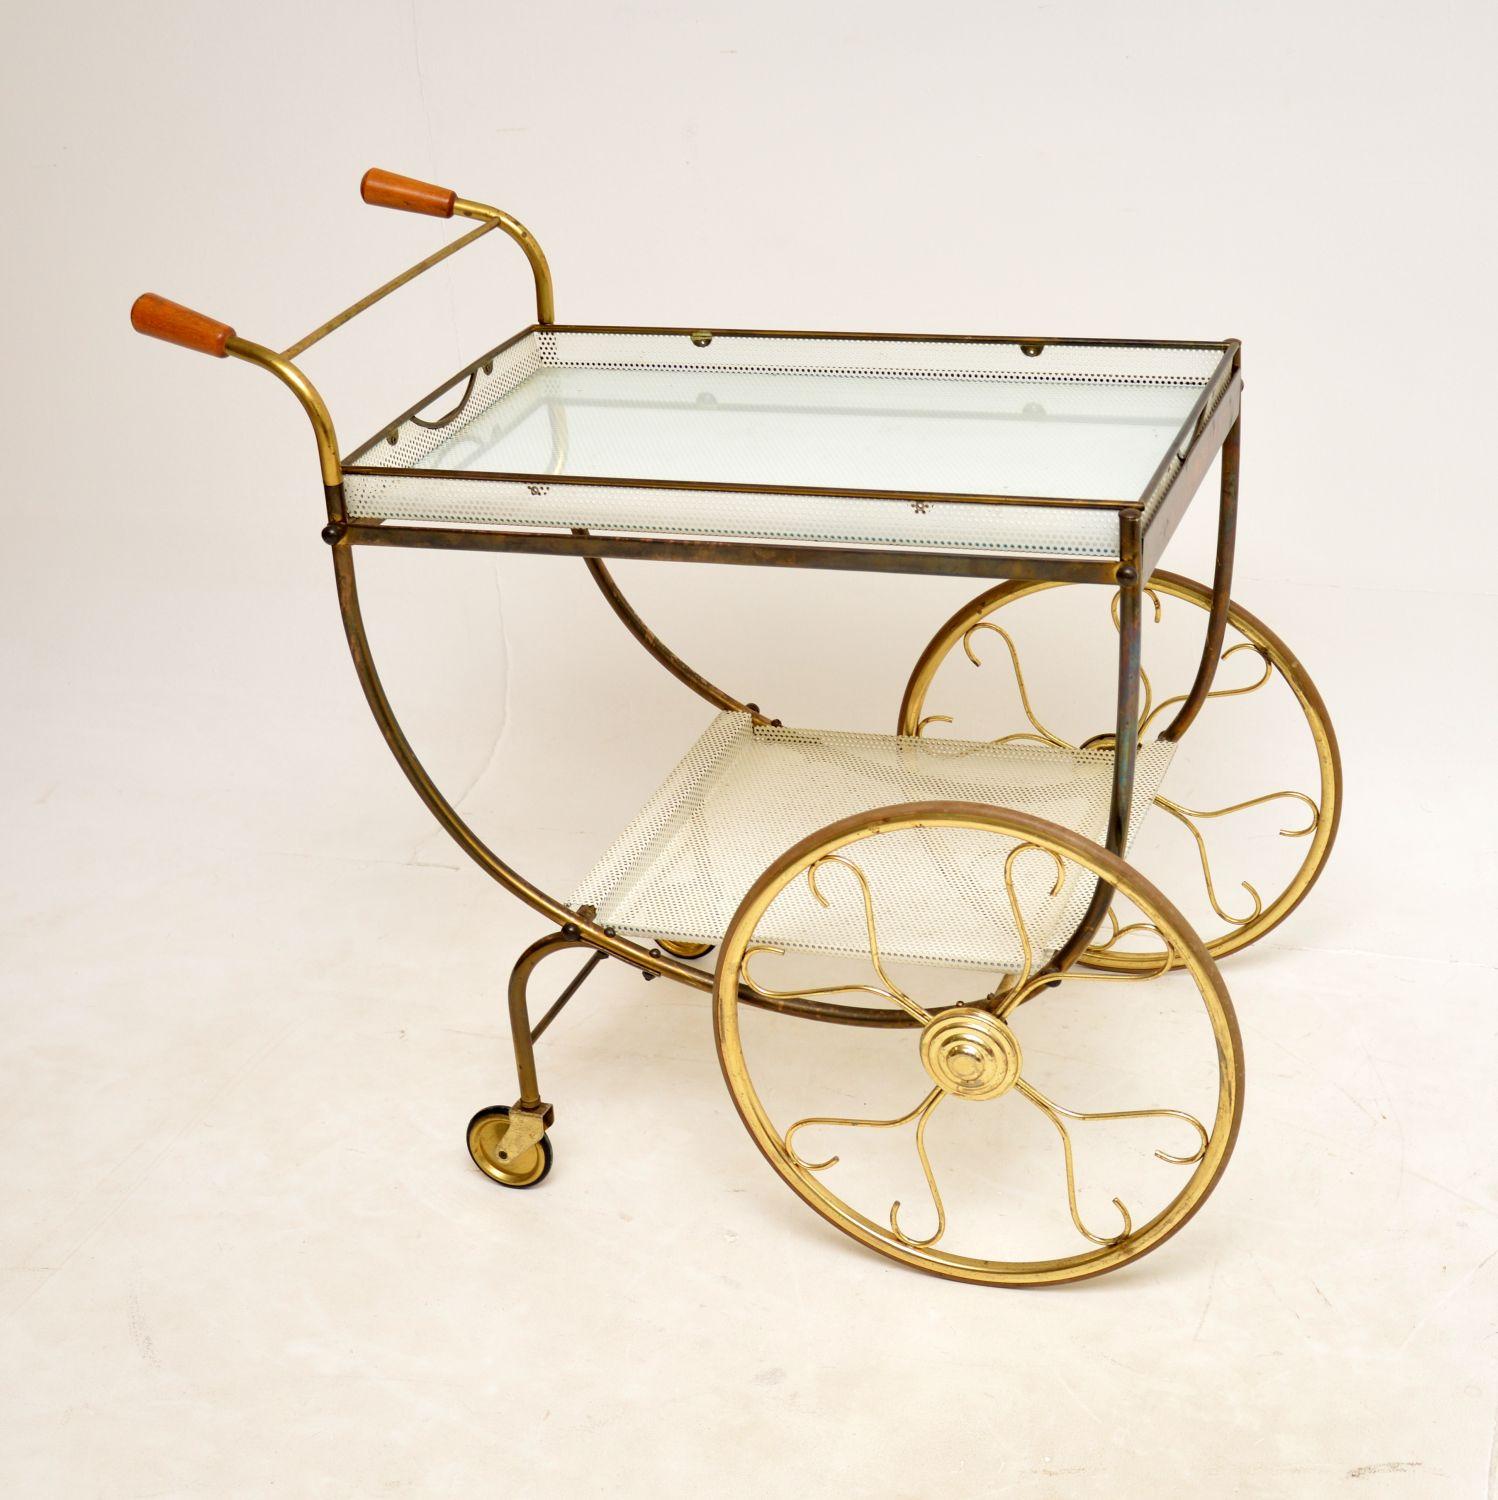 A stylish and extremely well made vintage Swedish brass drinks trolley by Josef Frank. This was made in Sweden by Svenskt Tenn, it dates from around the 1950-60’s.

The quality is amazing, this rolls smoothly on brass wheels and has two solid wood